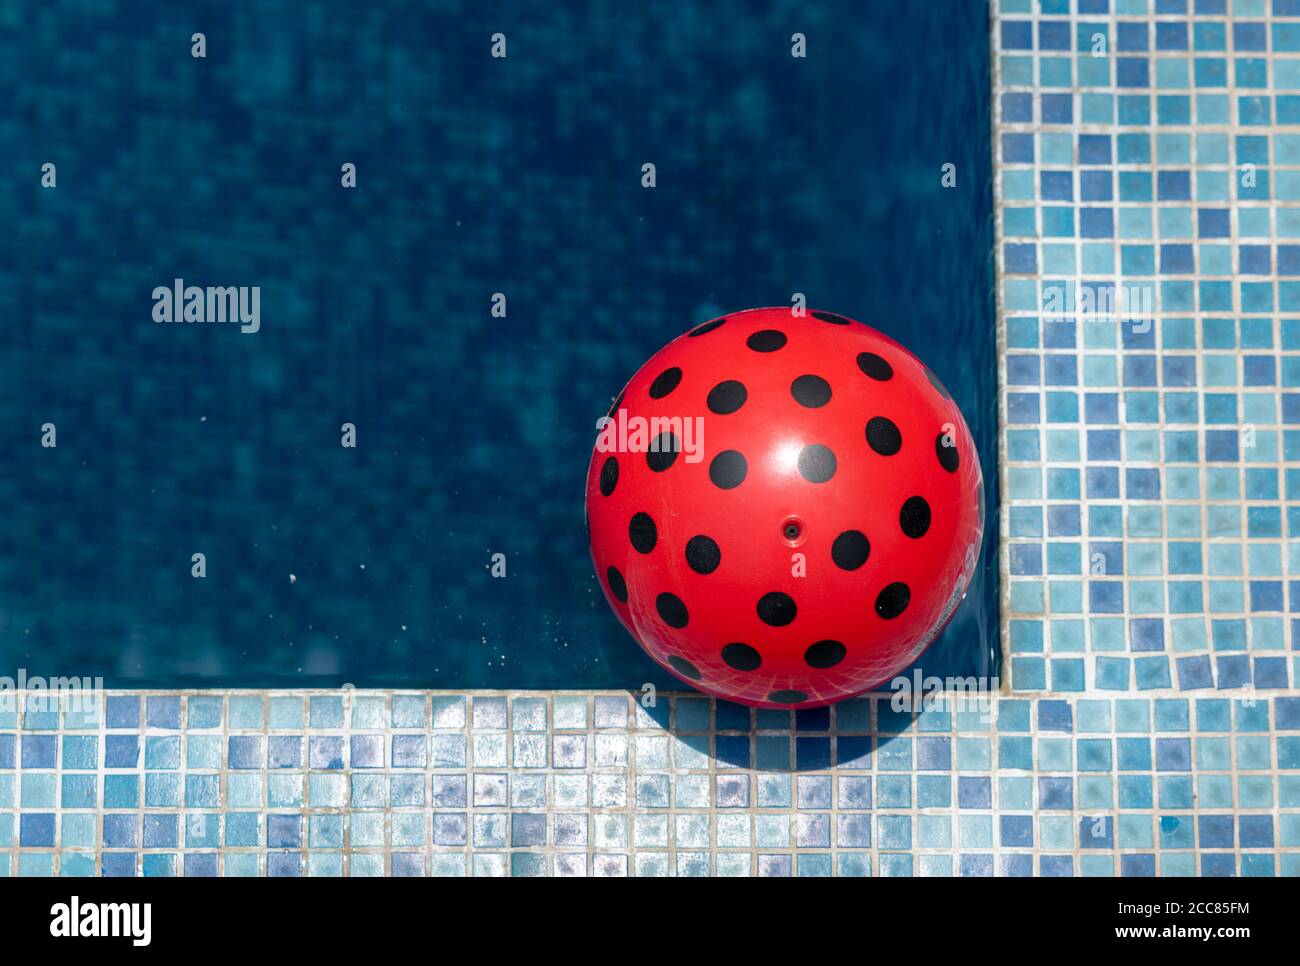 Top view of a red ball floating on the corner of a swimming pool on a sunny day. Stock Photo